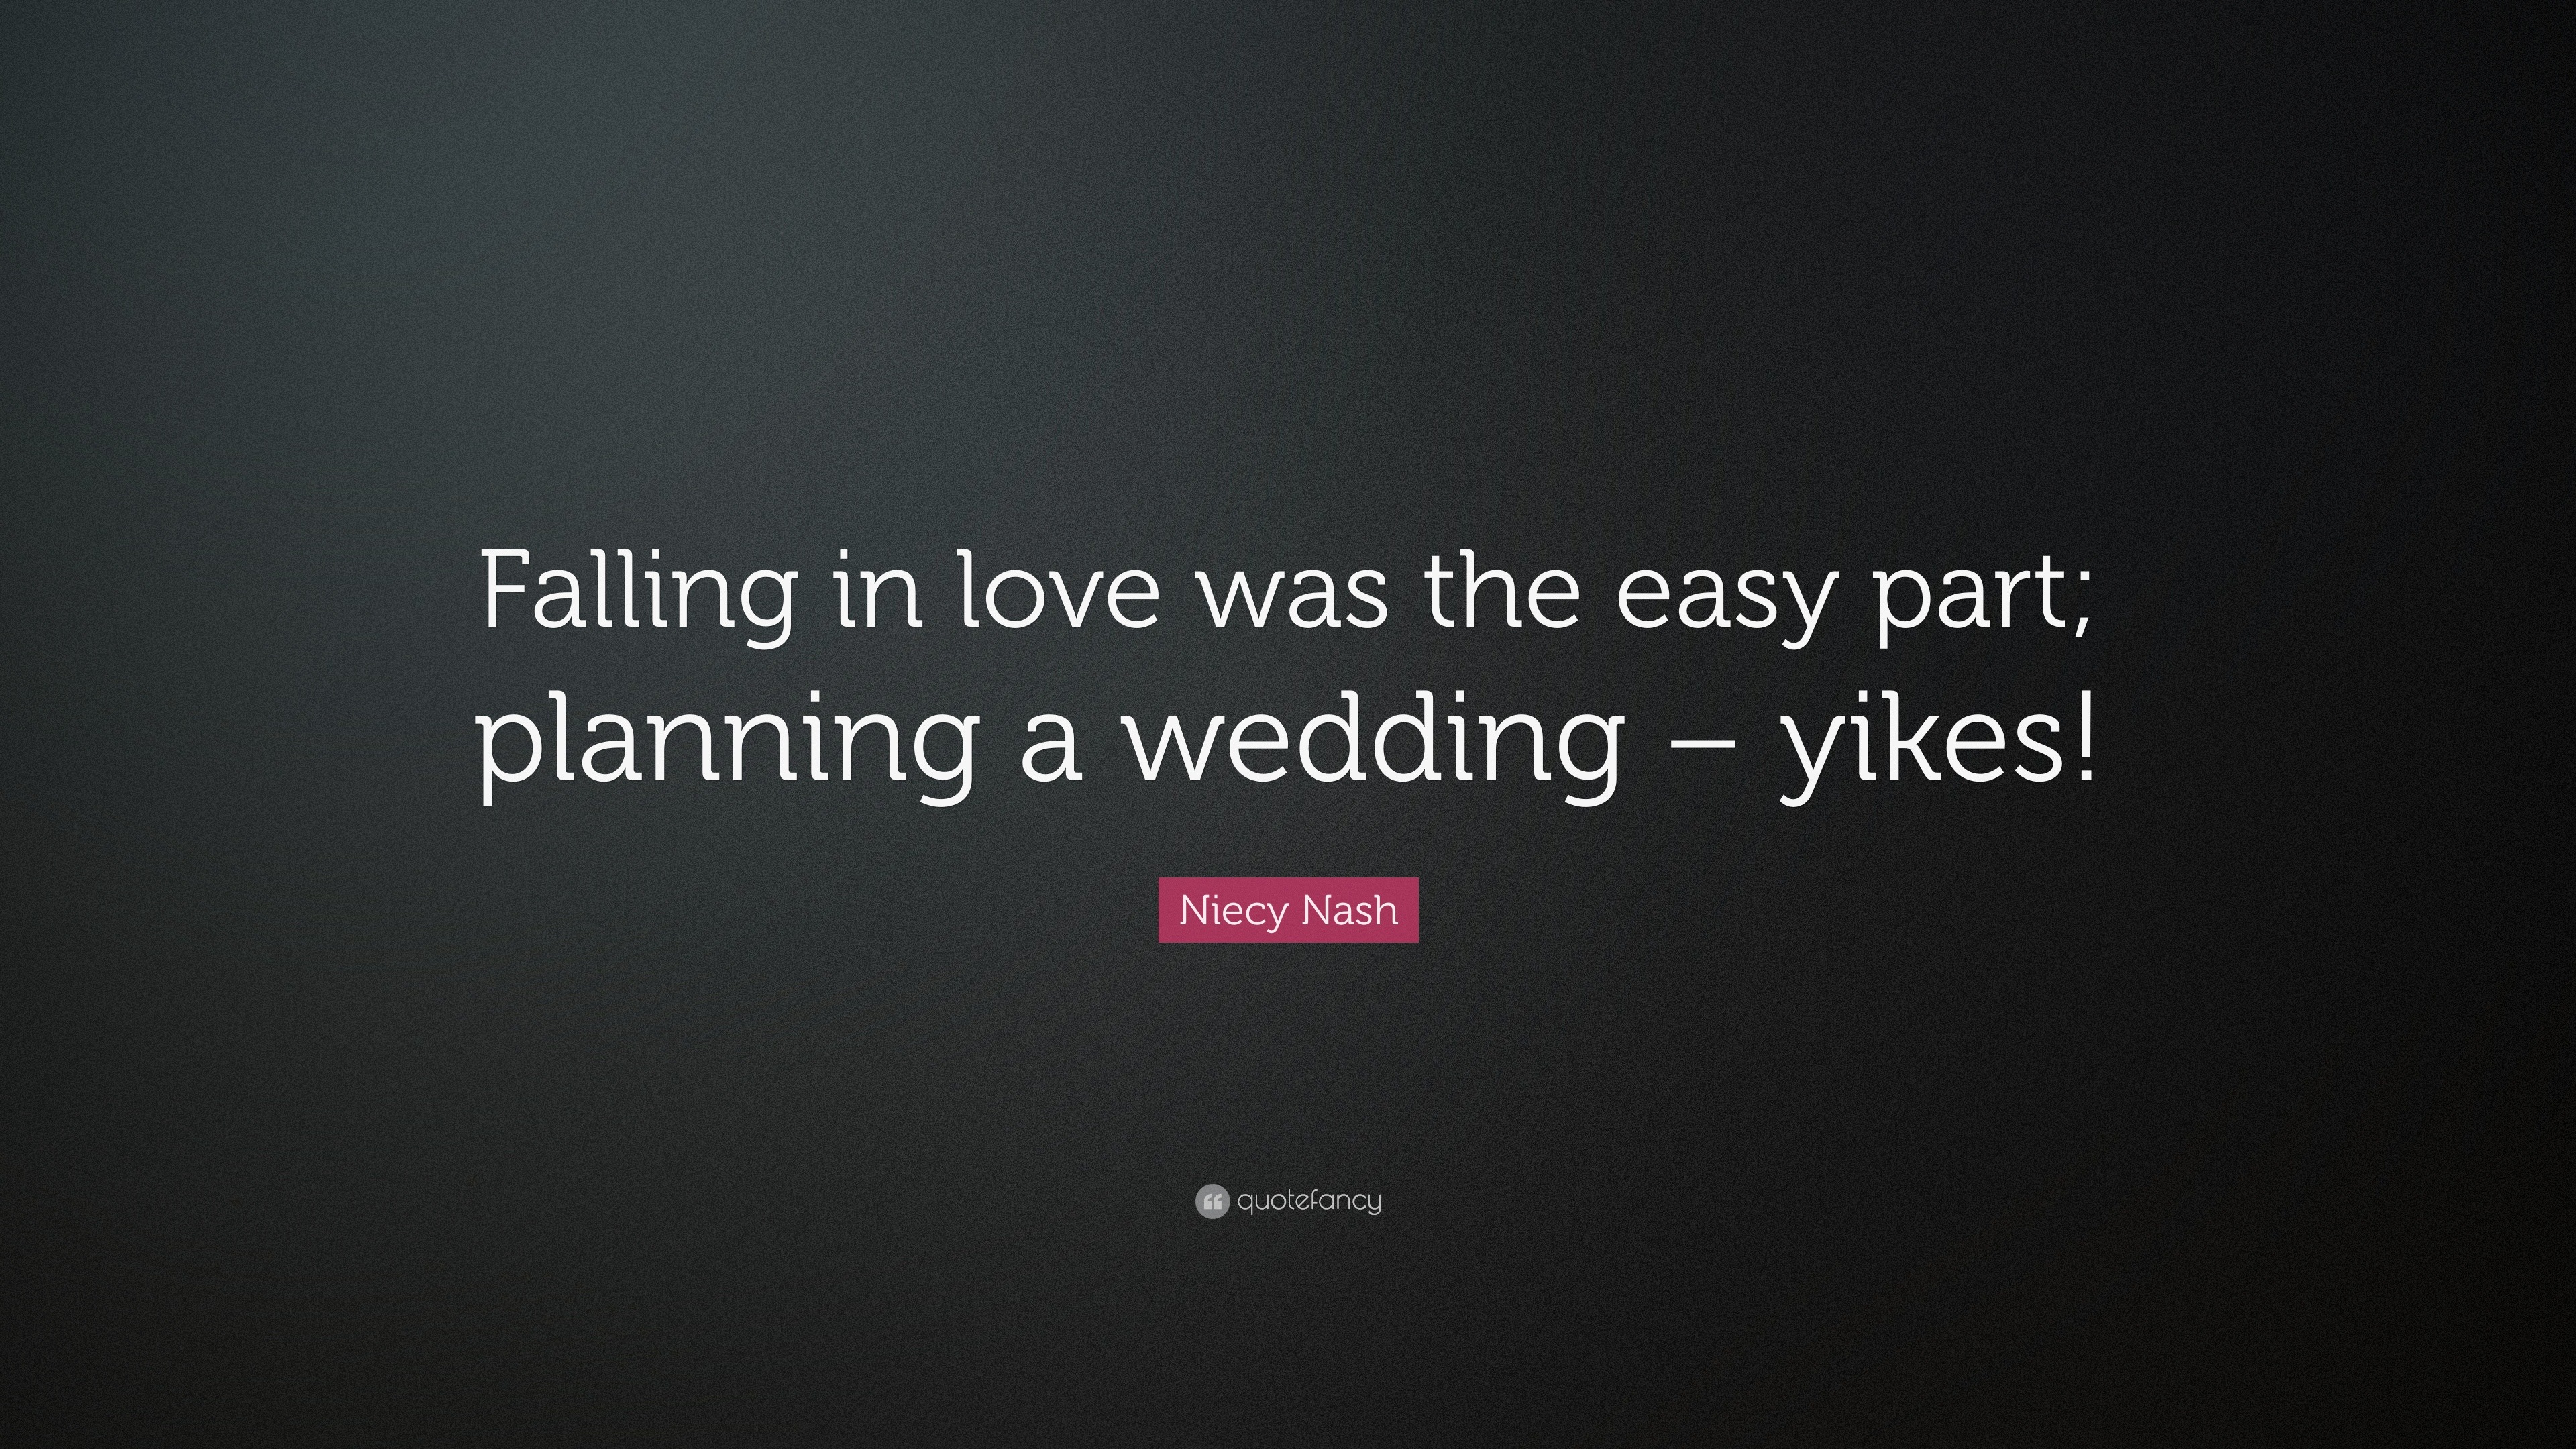 Niecy Nash Quote: “Falling in love was the easy part; planning a ...